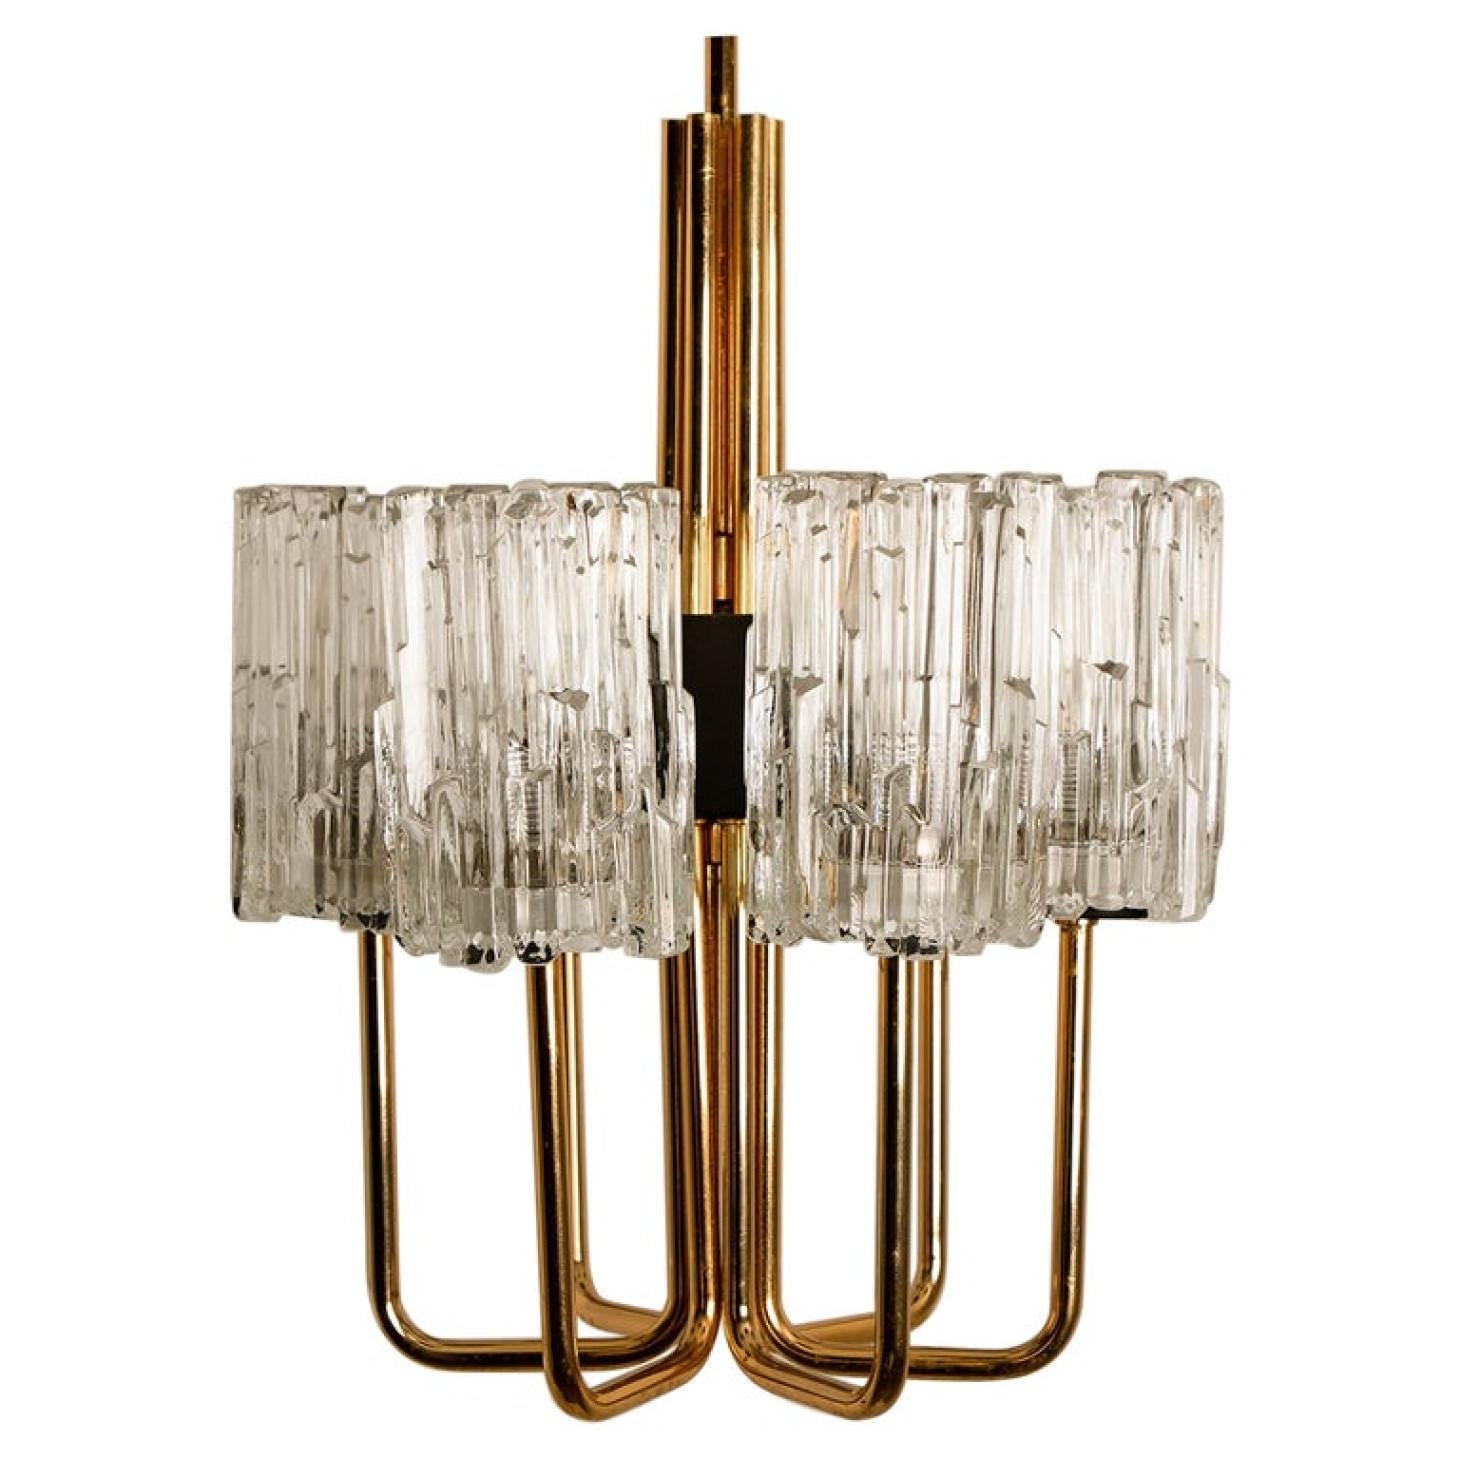 Beautiful chandelier by Hillebrand. With textured glass shades brass details a brass mounting hardware and black cord.
Illuminates beautifully.

The chandelier is cleaned well-wired and ready to use. The chandelier requires 6 x E27 light bulbs.